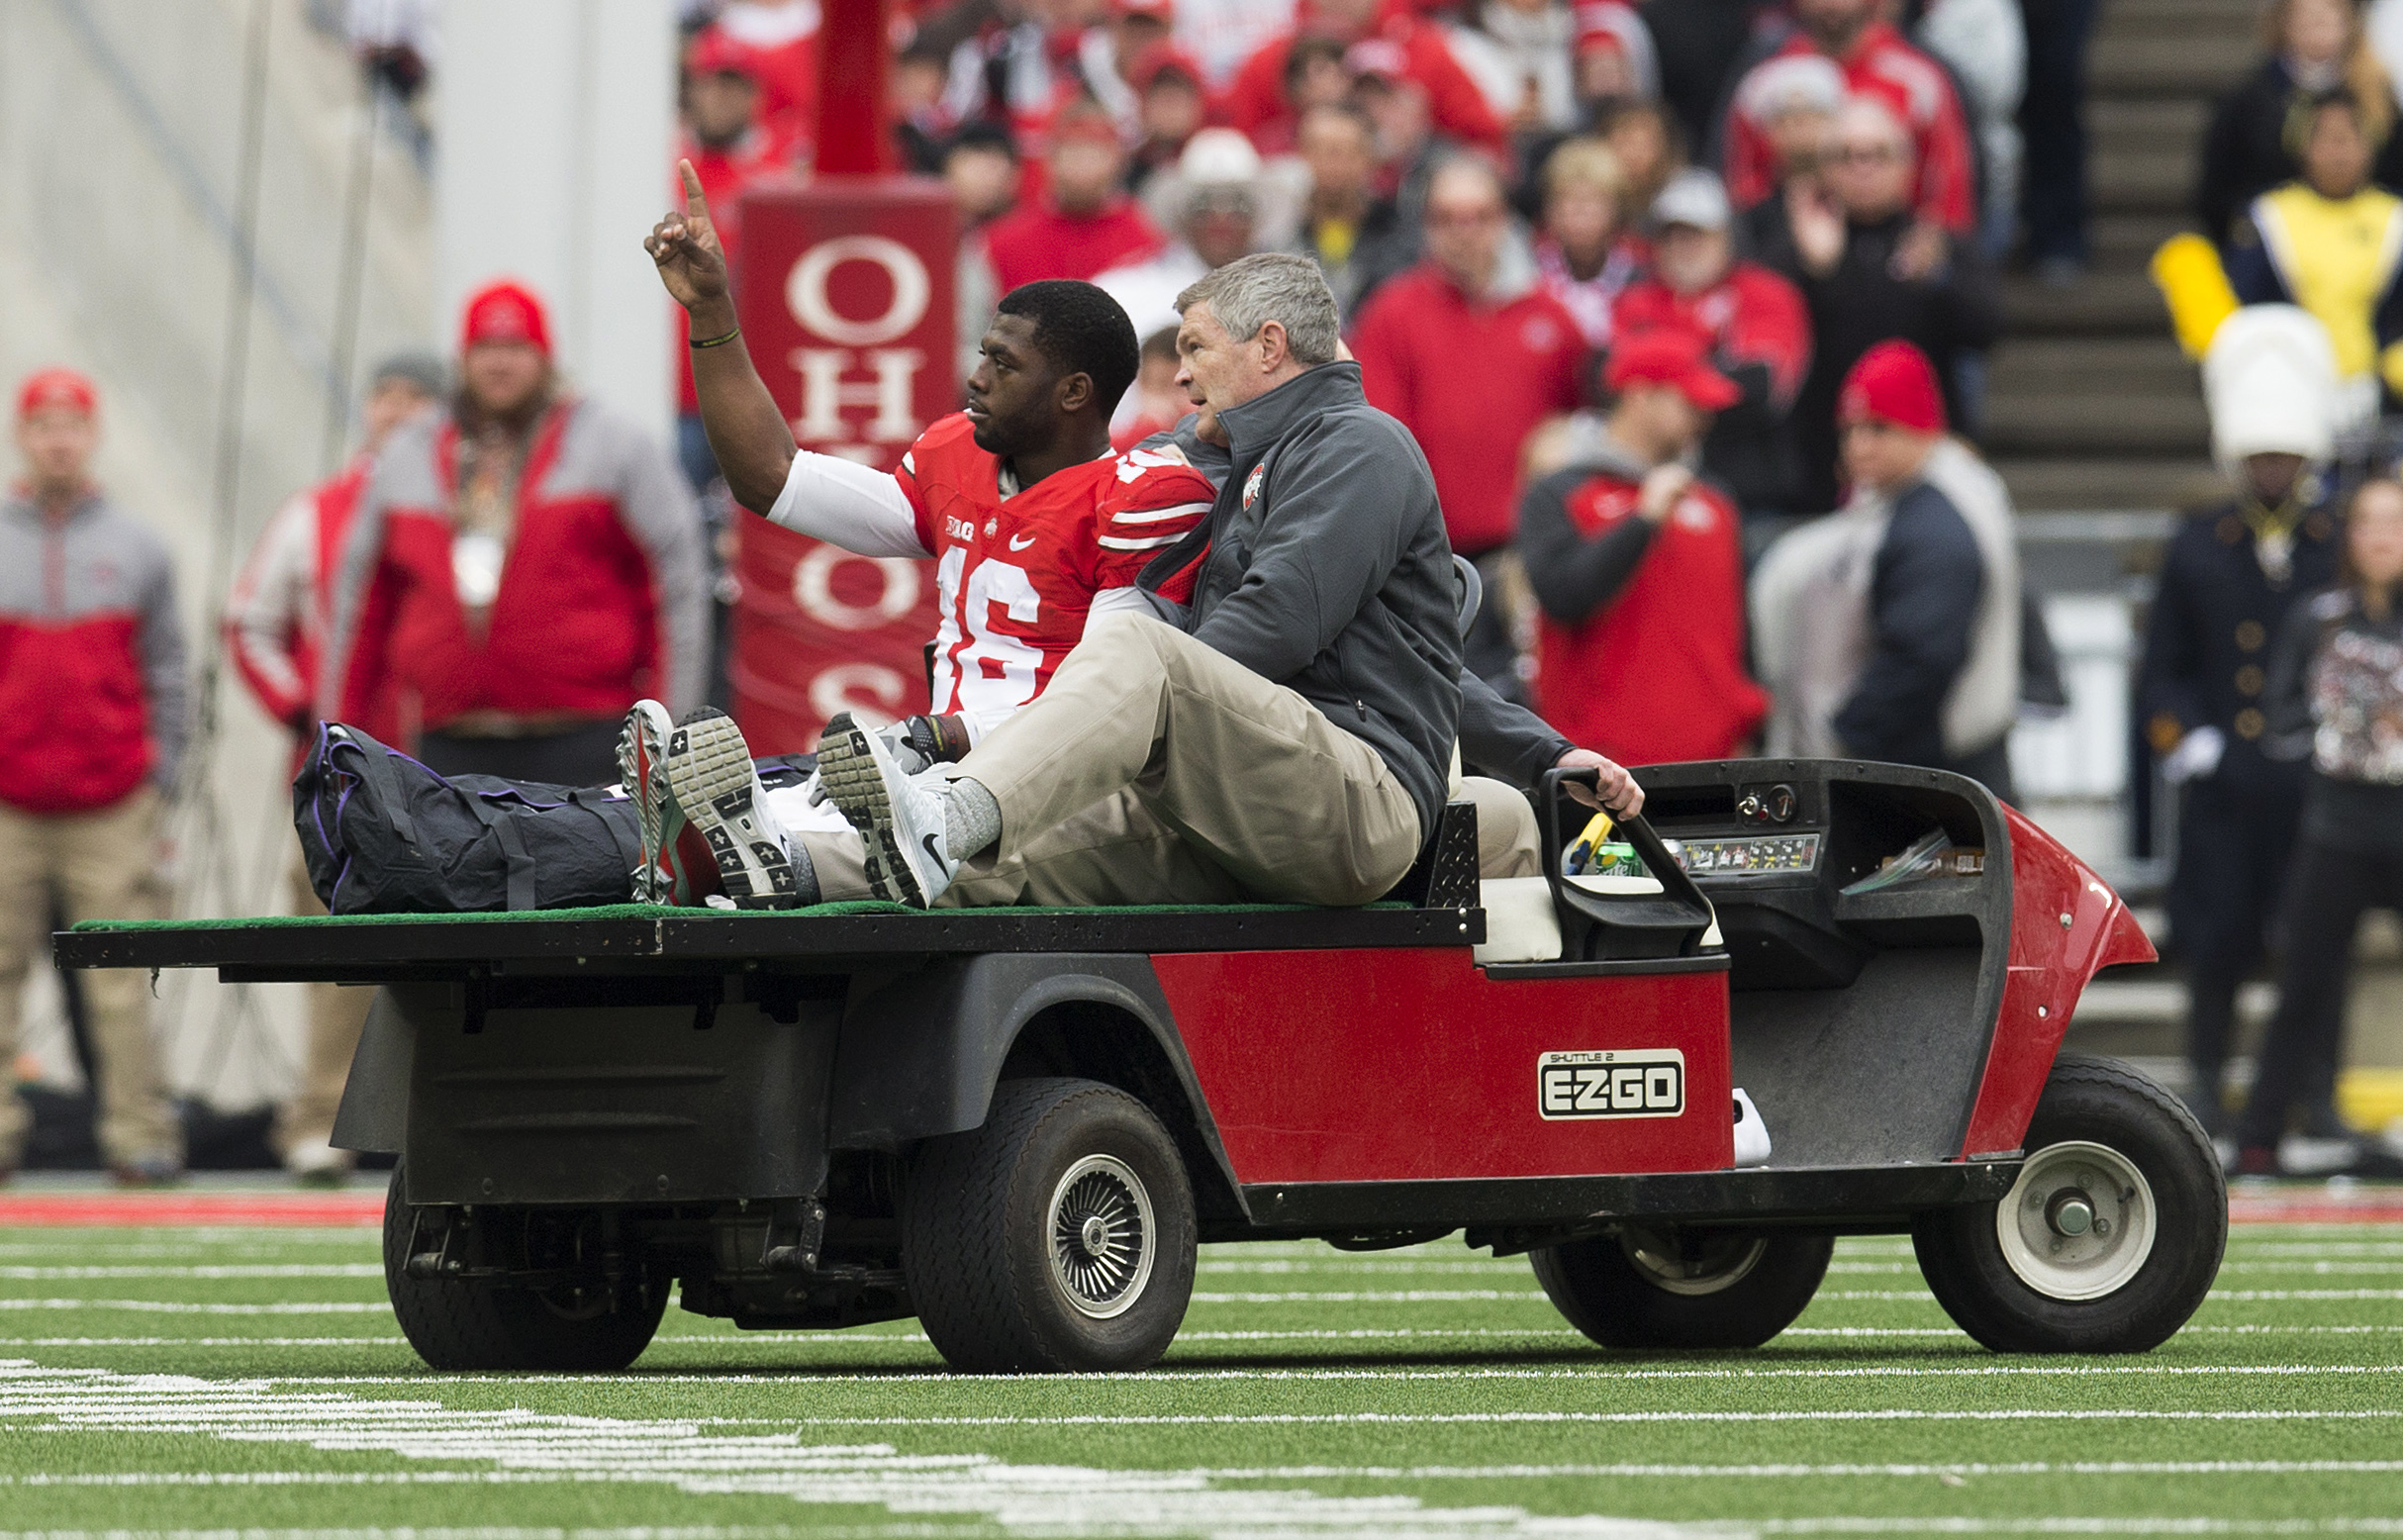 Nov 29, 2014; Columbus, OH, USA; Ohio State Buckeyes quarterback J.T. Barrett (16) is taken from the field after an injury against the Michigan Wolverines at Ohio Stadium. (Greg Bartram-USA TODAY Sports)